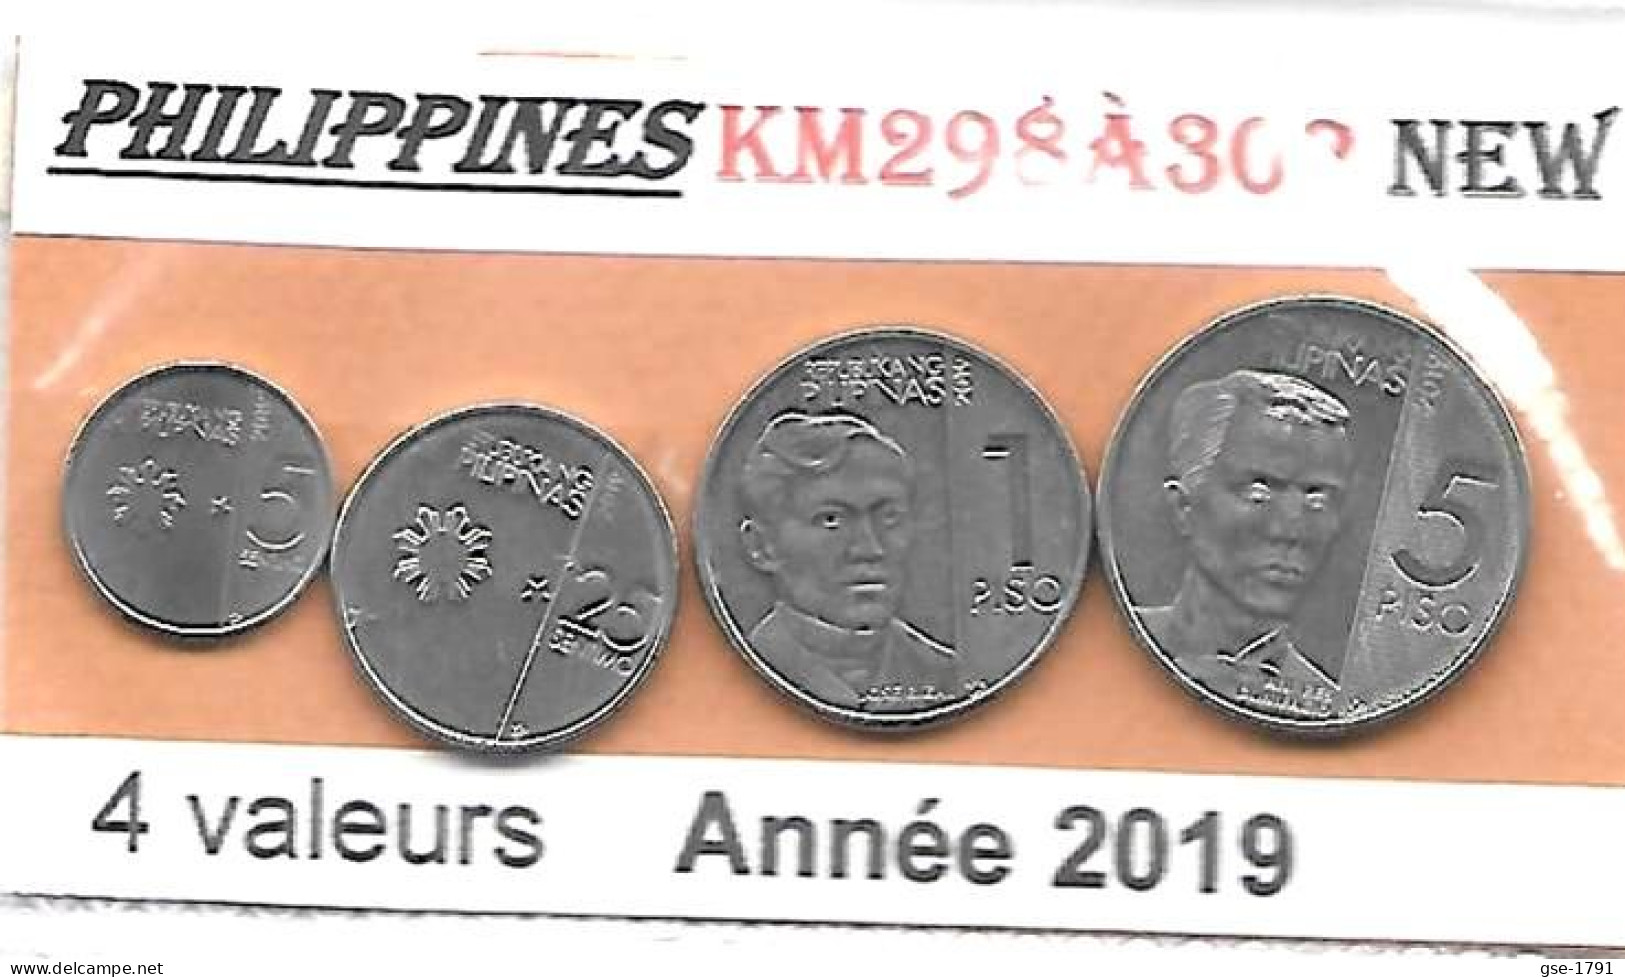 PHILIPPINES  Nouvelles Frappes  Année 2019      5, 25 Sentimo & 1, 5 Piso Neuf. - Philippinen